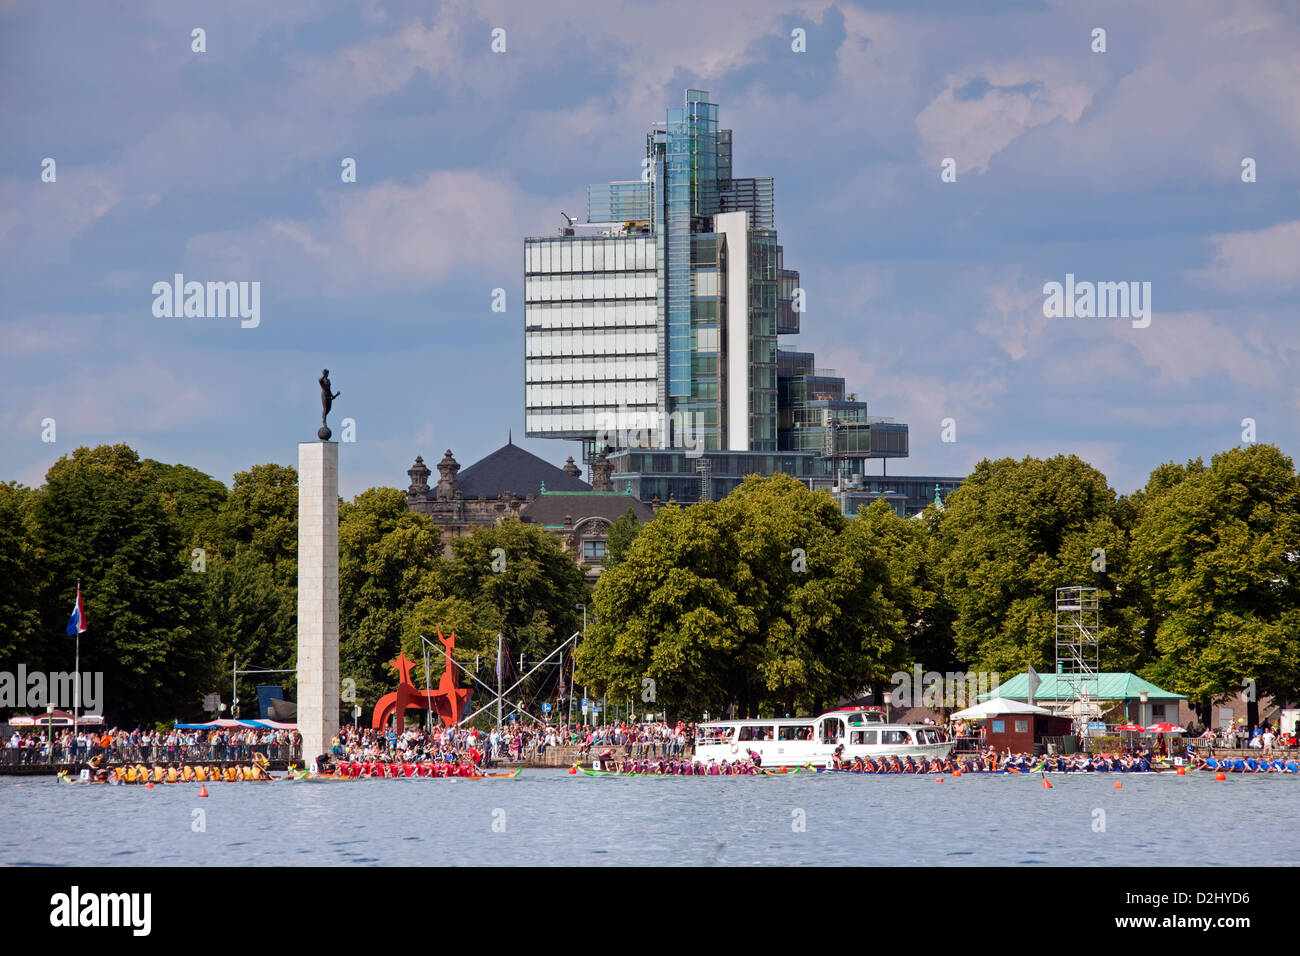 Dragonboat race on artificial lake Maschsee and the Norddeutsche Landesbank in the background, Hanover, Lower Saxony, Germany Stock Photo